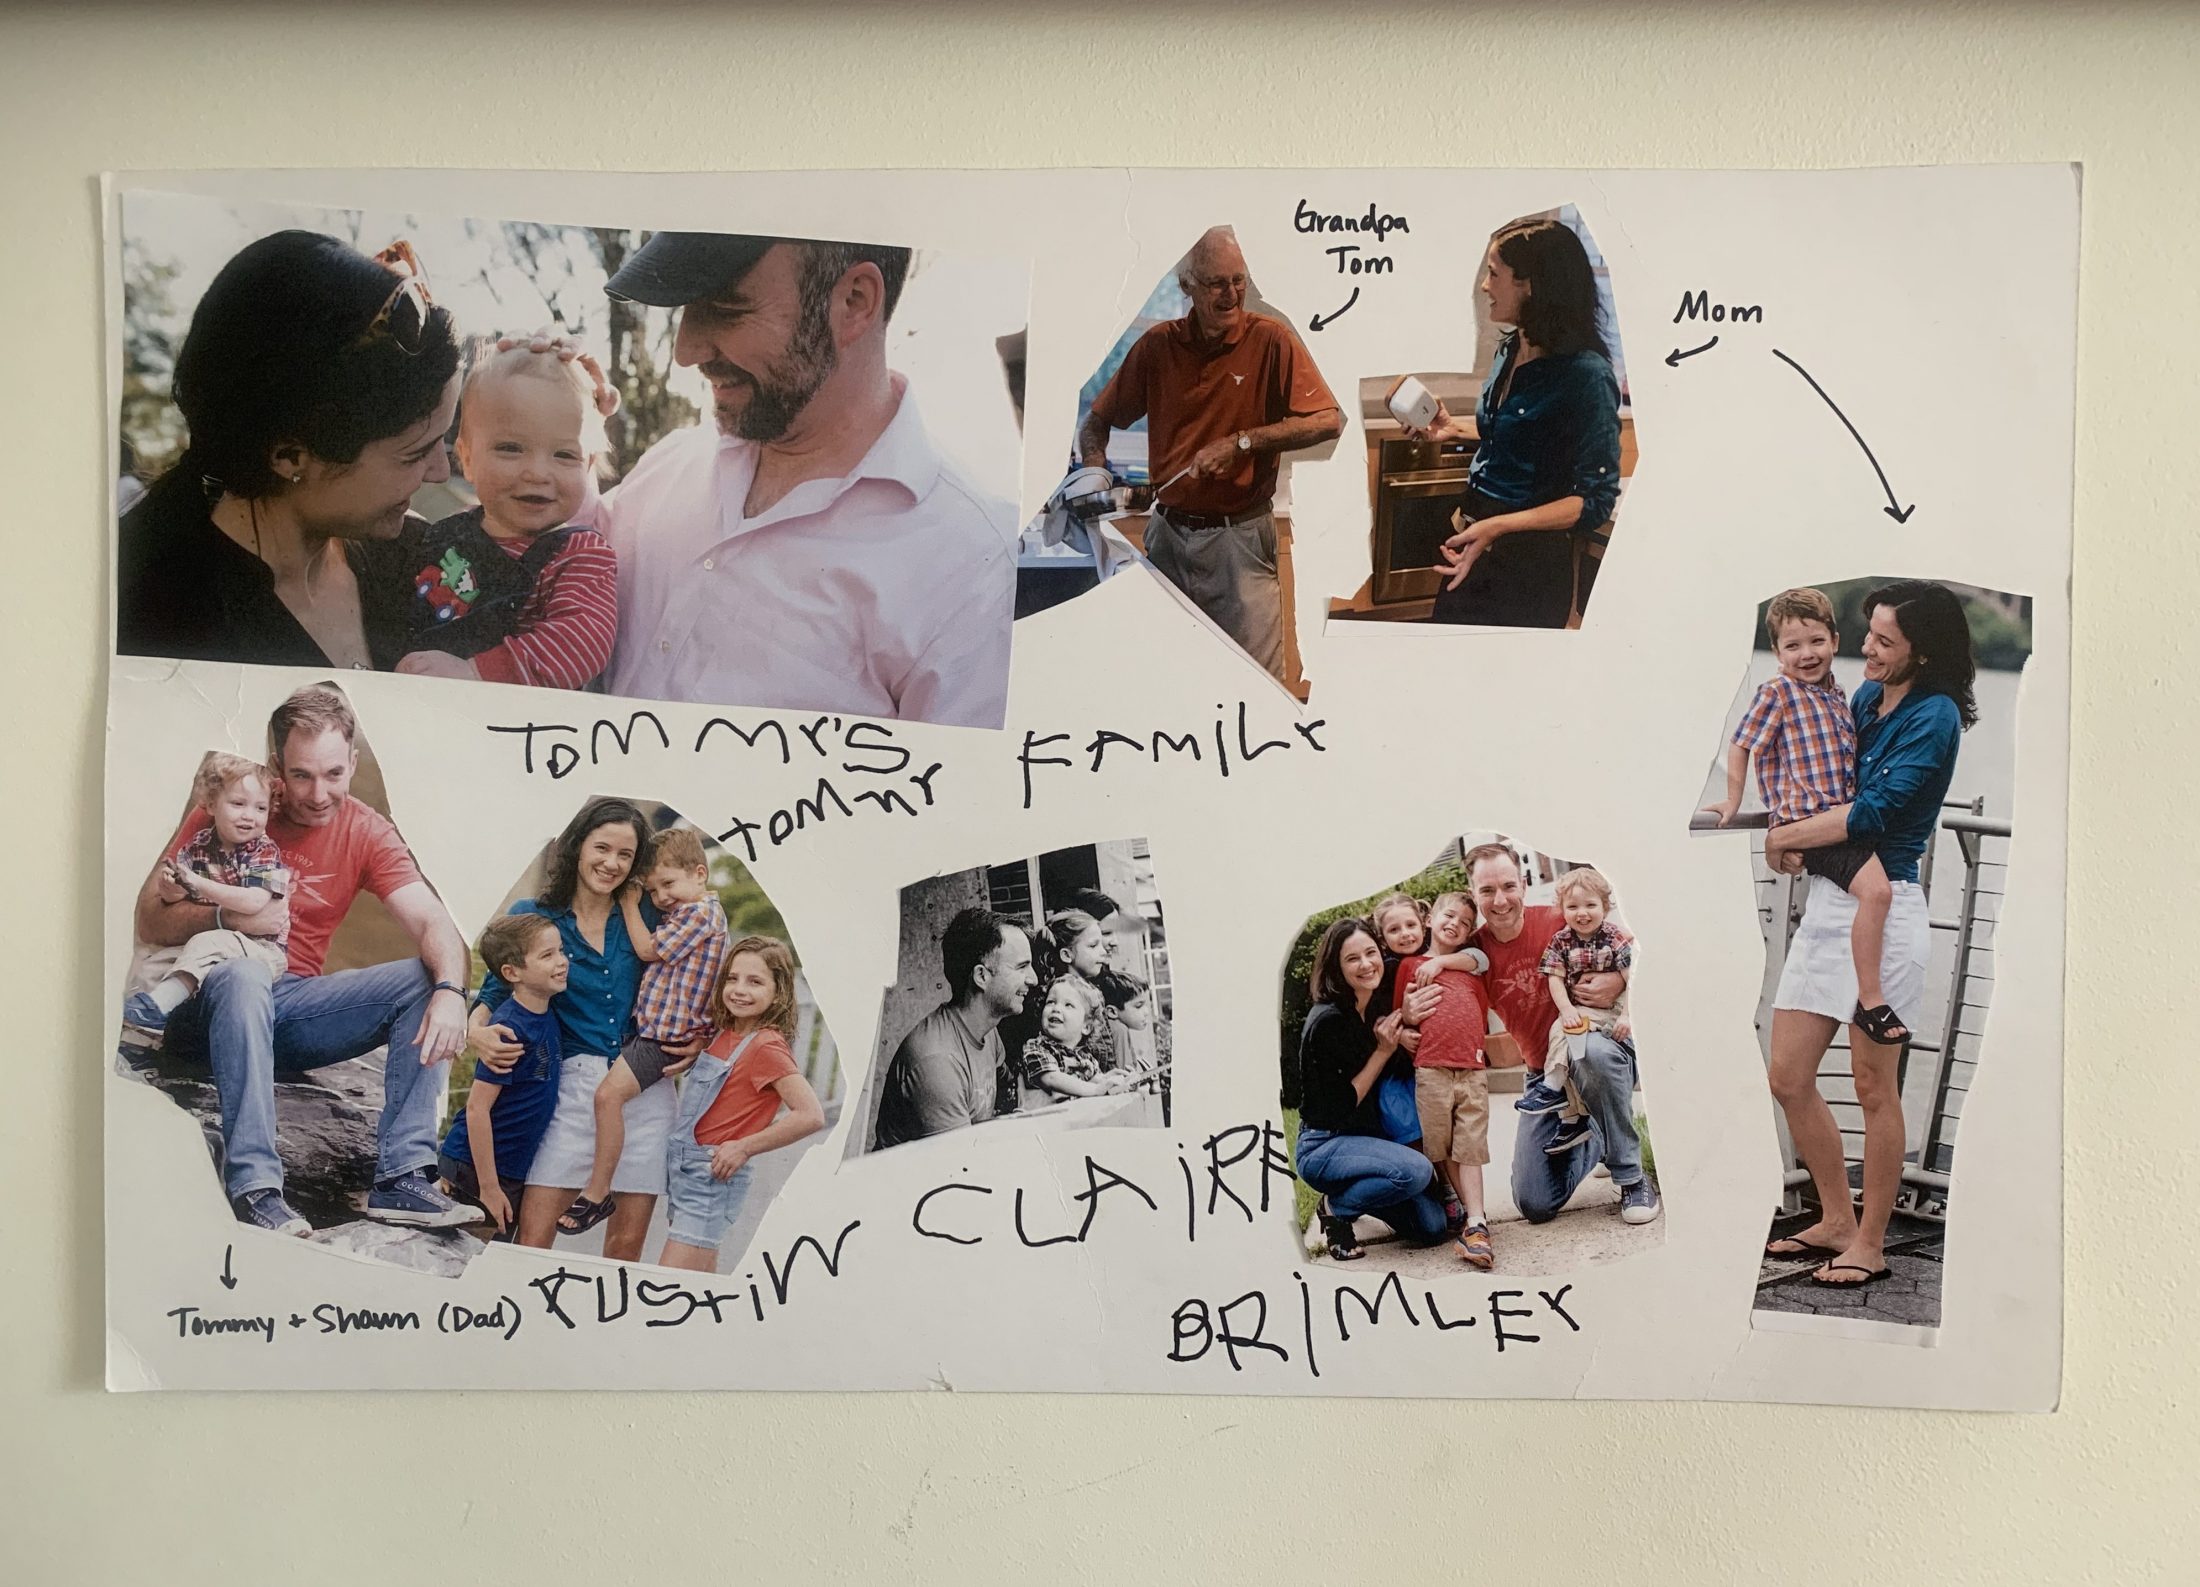 Poster collage of the family of DC widow blog writer Marjorie Brimley